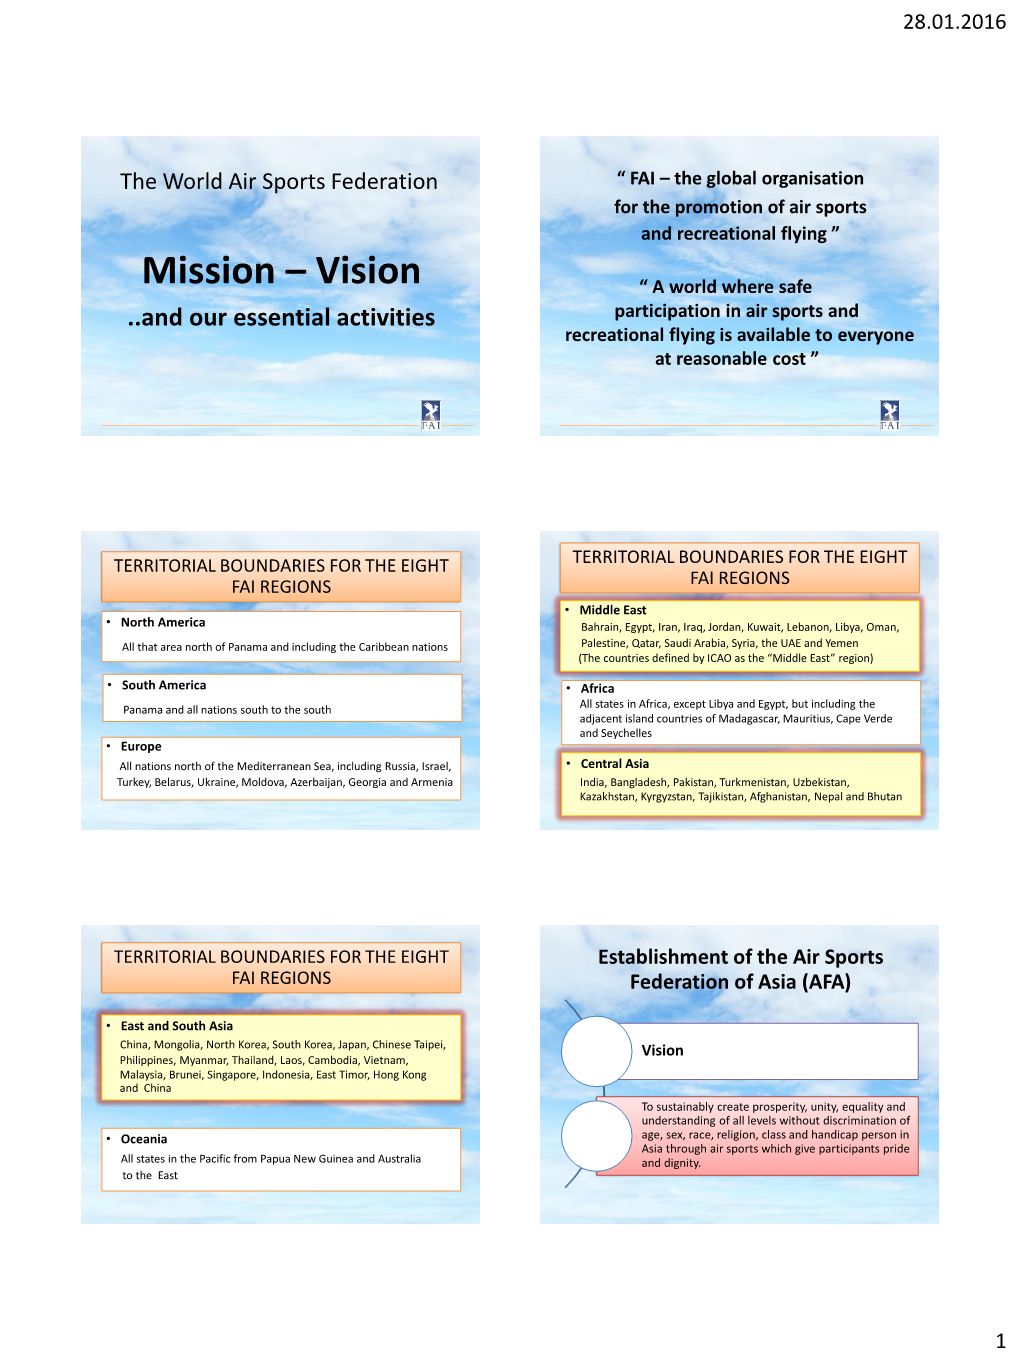 Mission – Vision “ a World Where Safe ..And Our Essential Activities Participation in Air Sports and Recreational Flying Is Available to Everyone